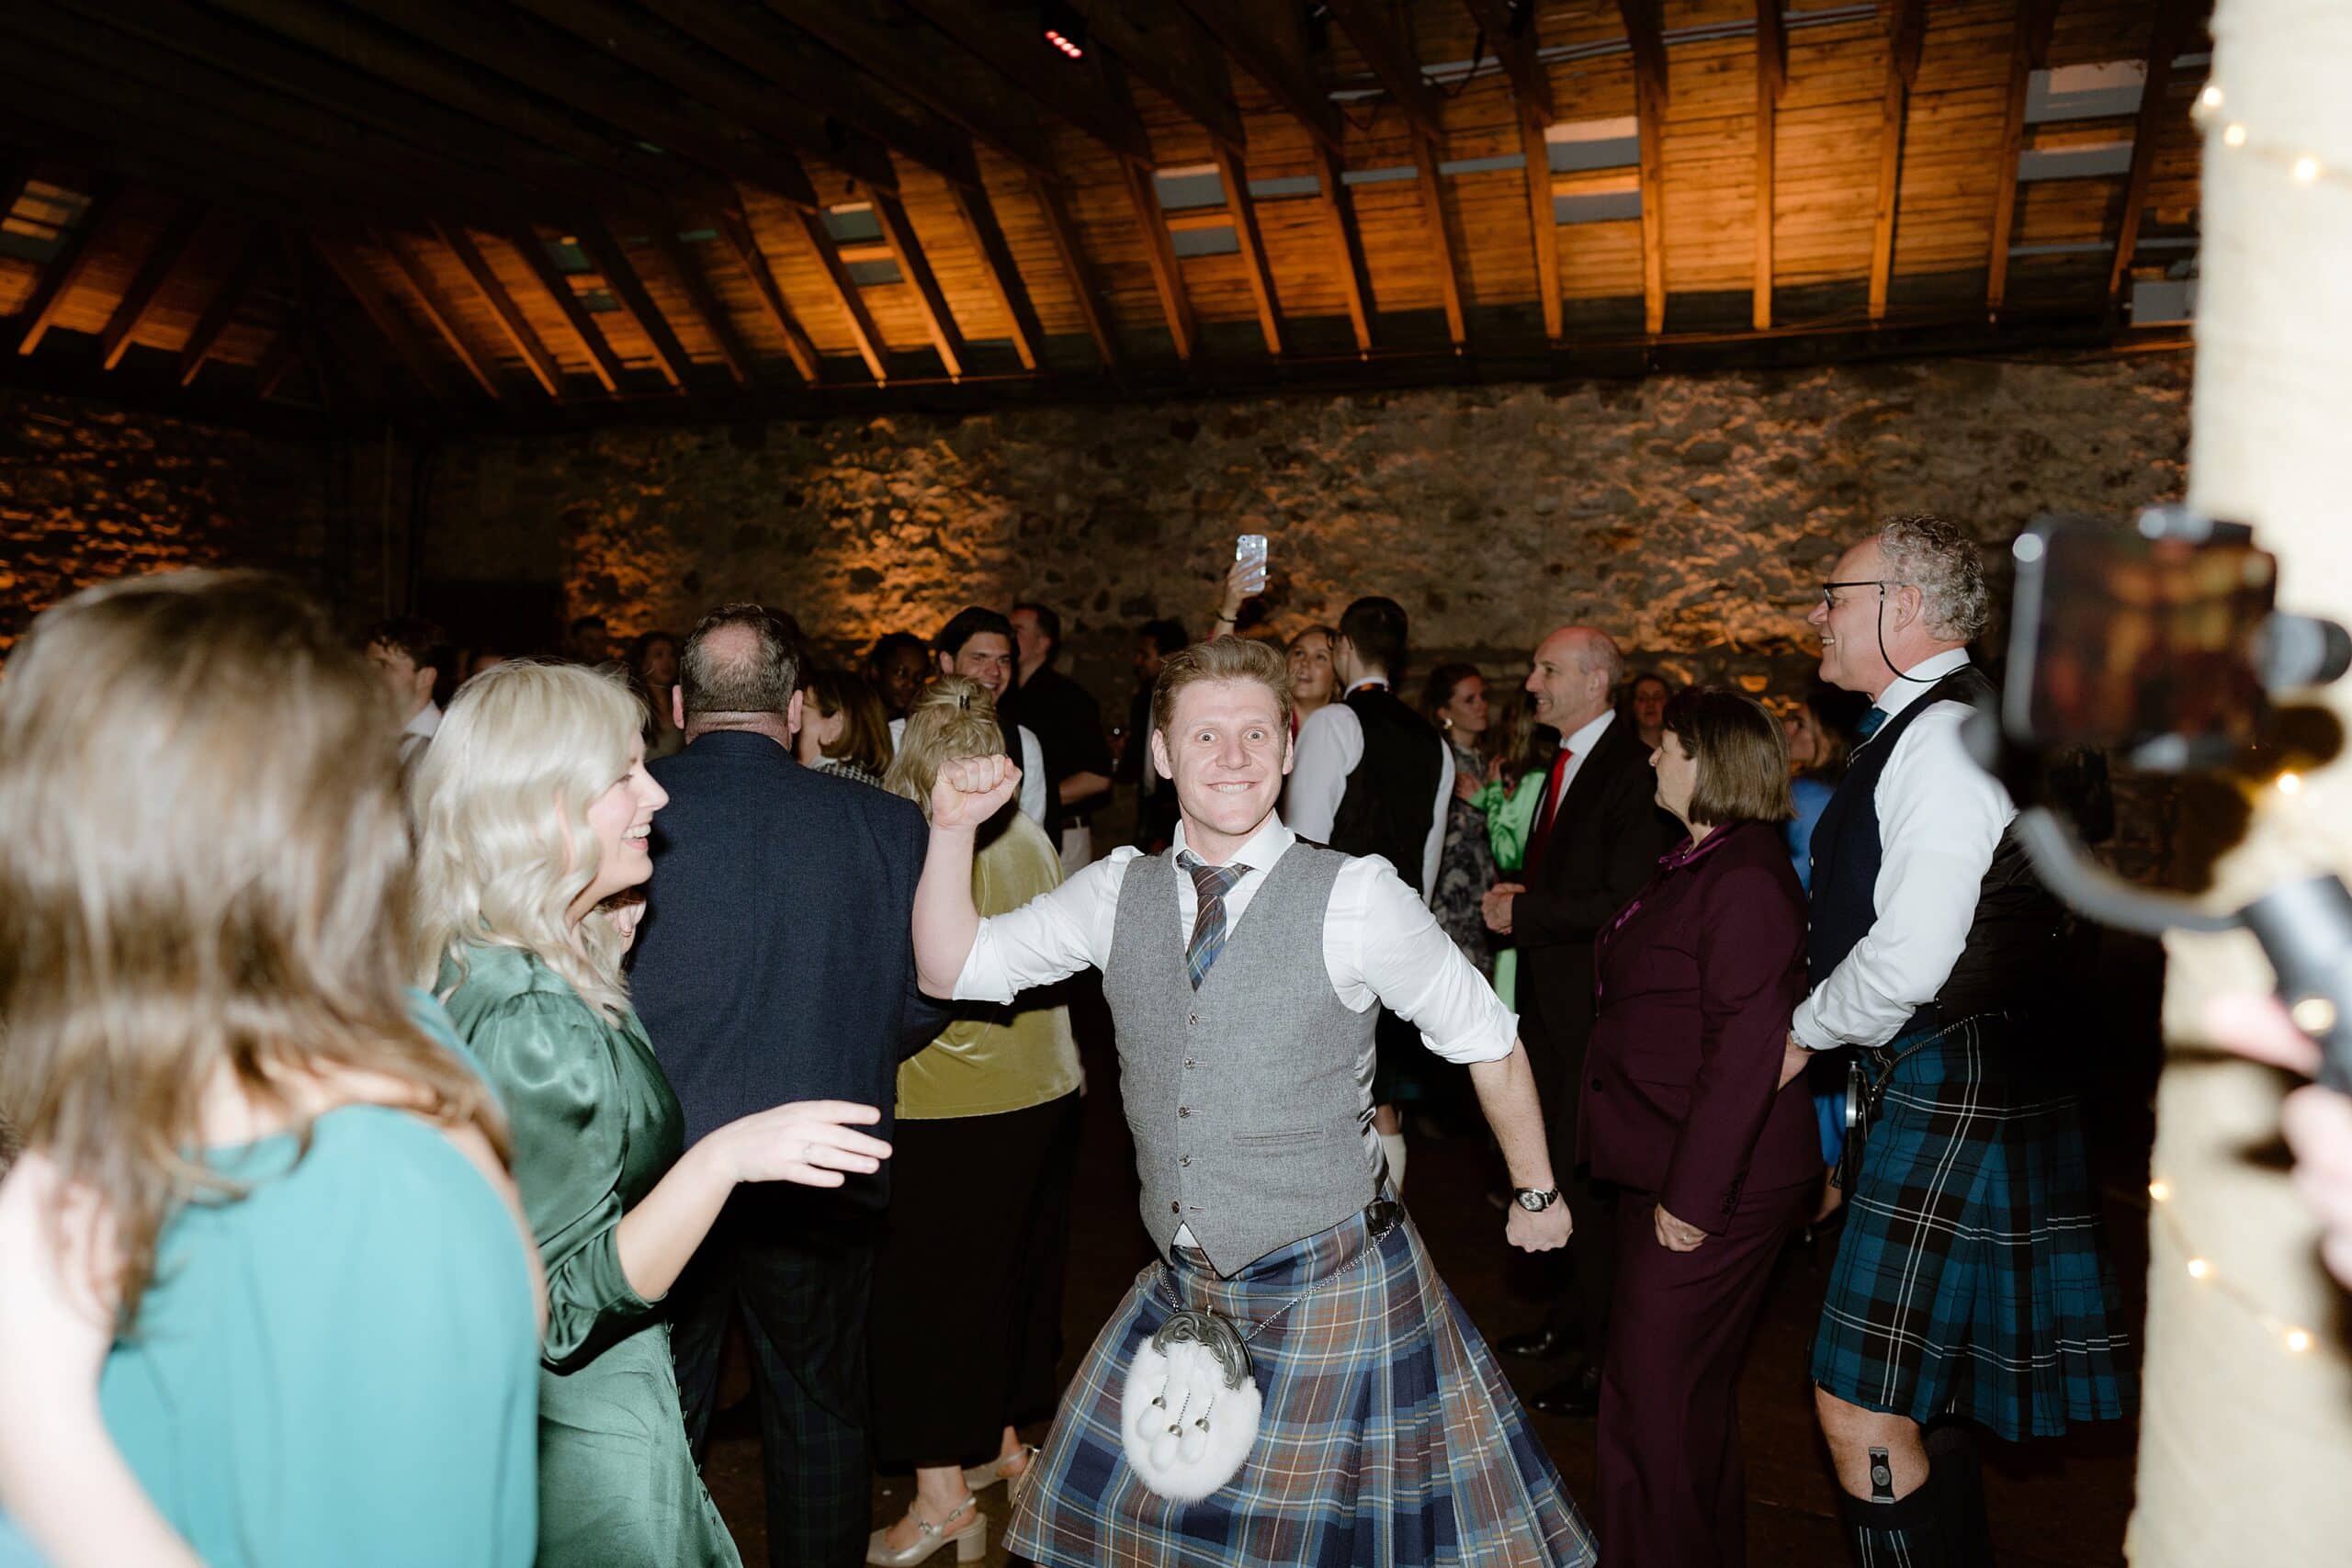 st andrews wedding photographer captures guests dancing underneath wooden beams and festoon lights a barn wedding venue in scotland